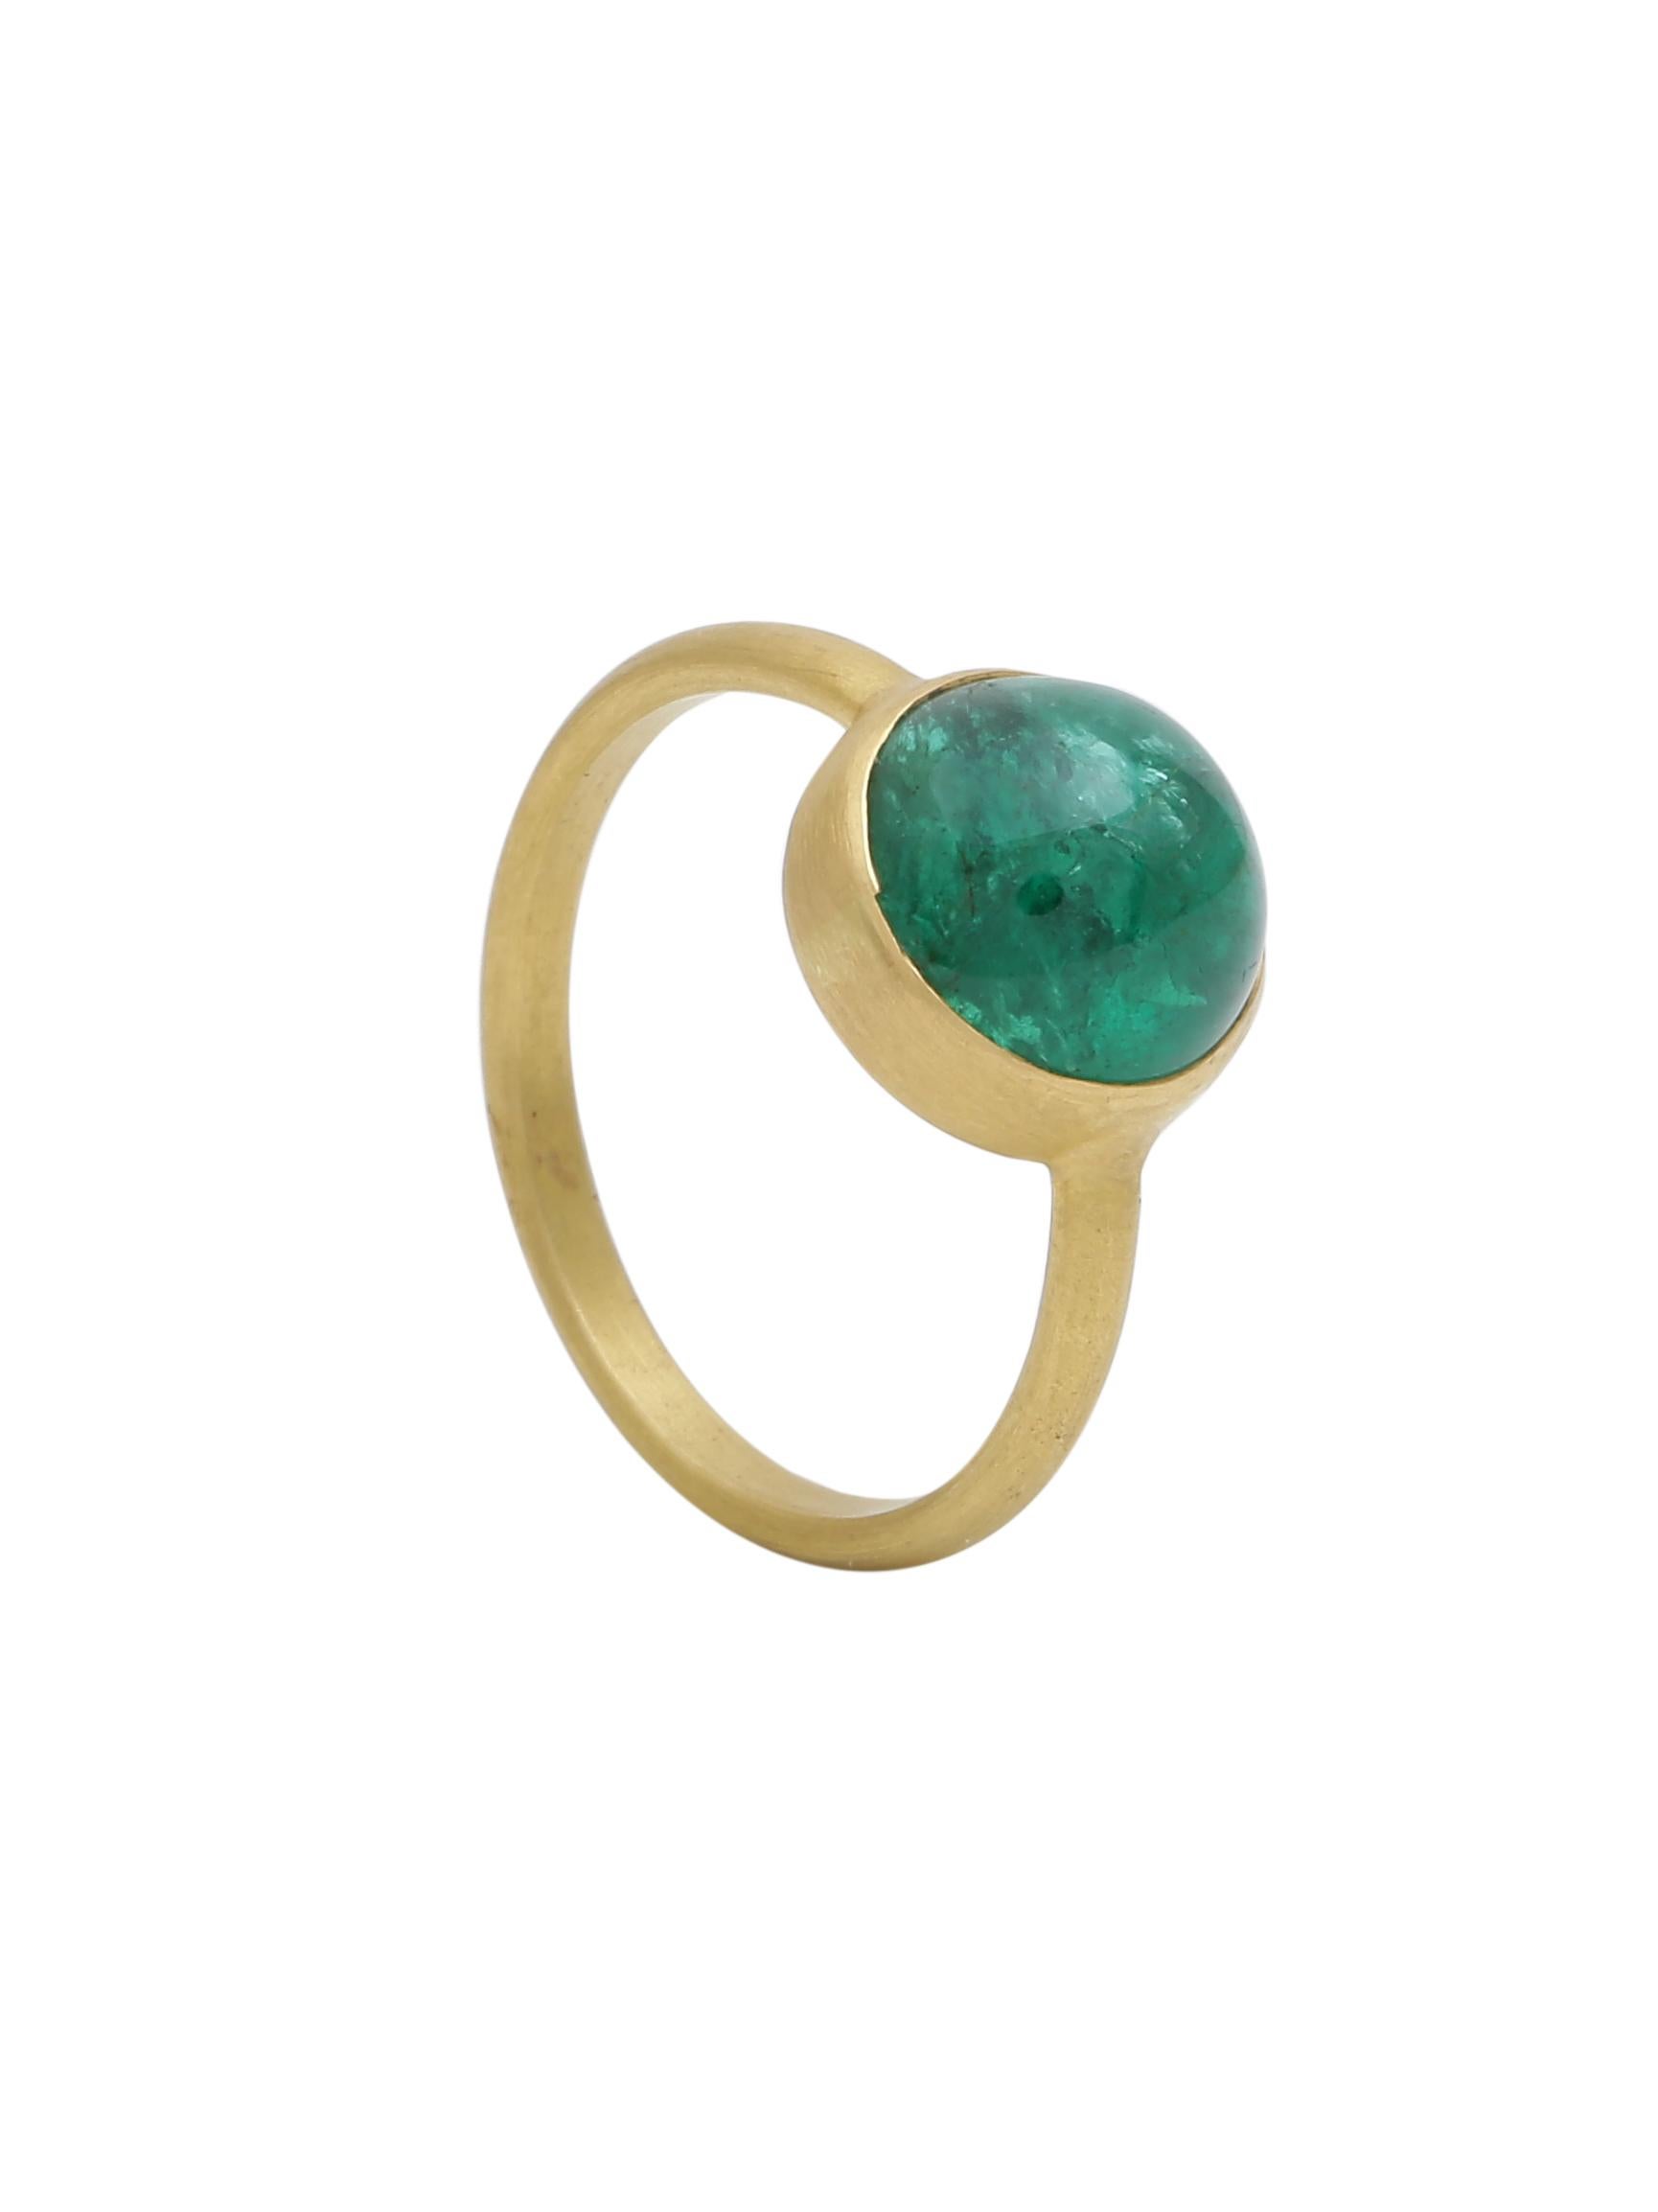 A nice quality Round Zambian Emerald Cabochon handcrafted into a ring in 18K yellow gold in matte finish. The finish of the gold compliments the colour of the emerald making it more vivid. Wear it everyday as a solo ring or stack it with other